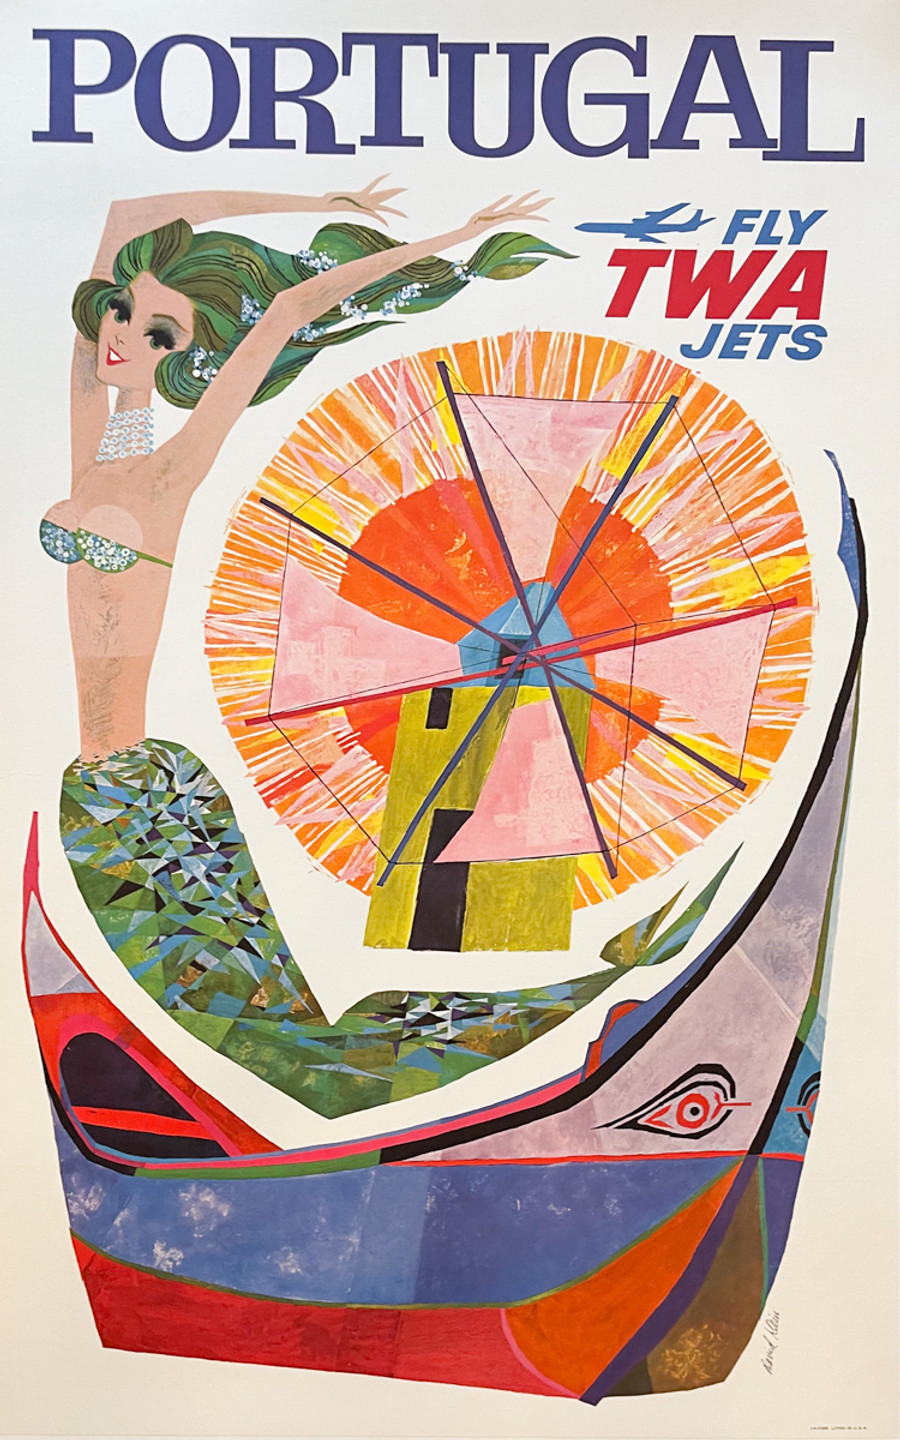 Portugal Fly TWA Jet original 1960 vintage American travel poster by David Klein linen backed